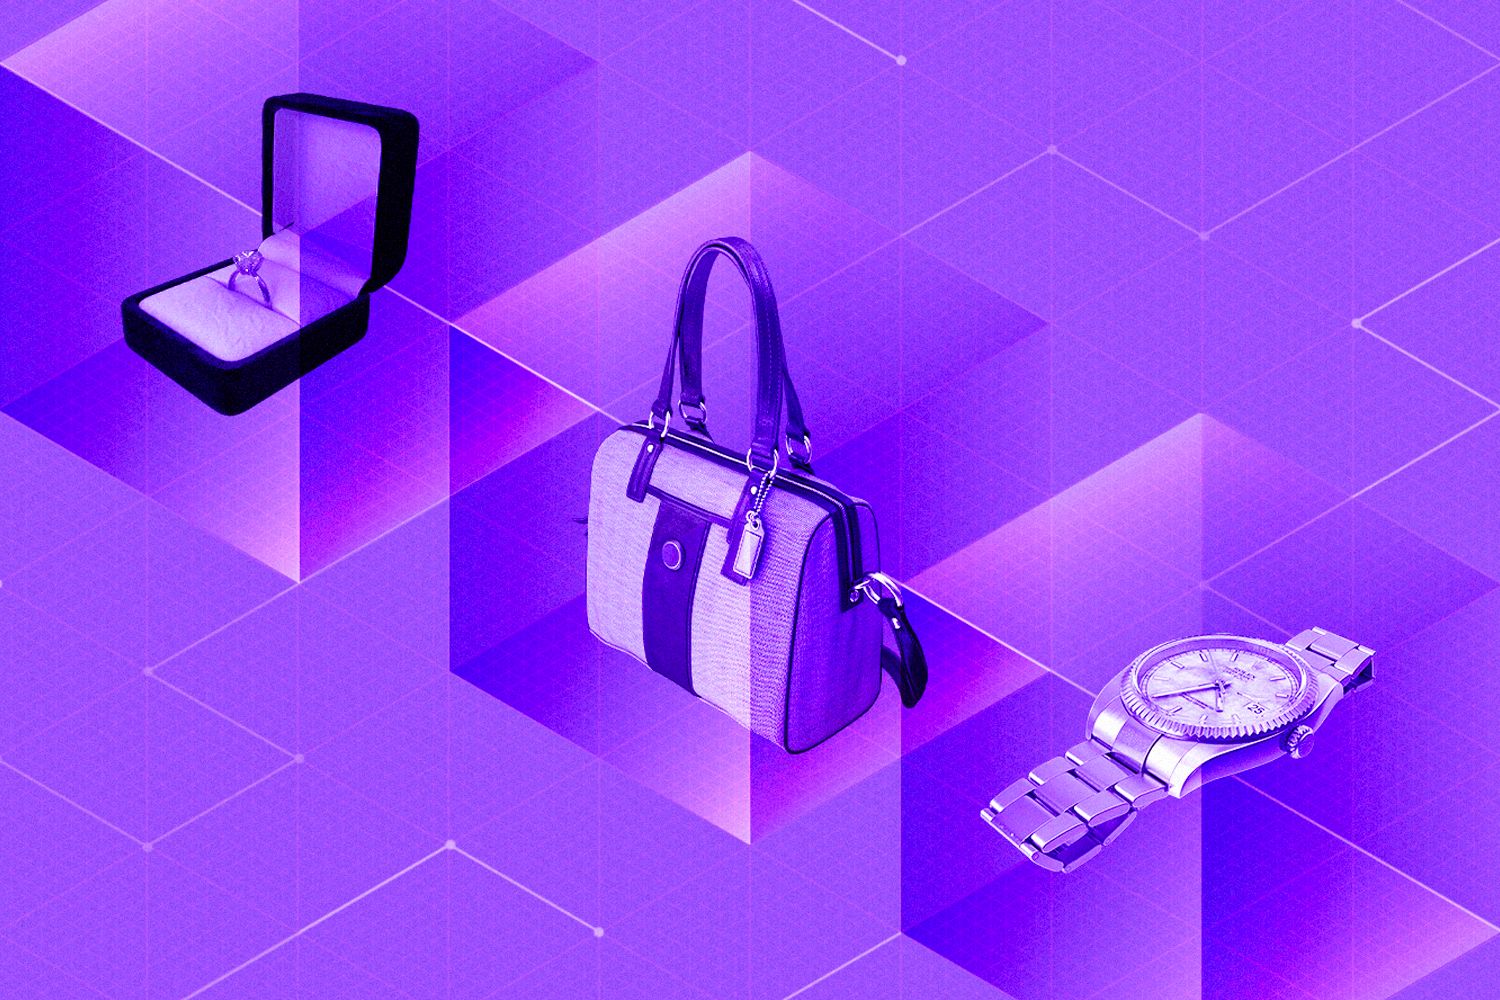 ENHANCING AUTHENTICATION FOR LUXURY BRANDS WITH BLOCKCHAIN - AURA